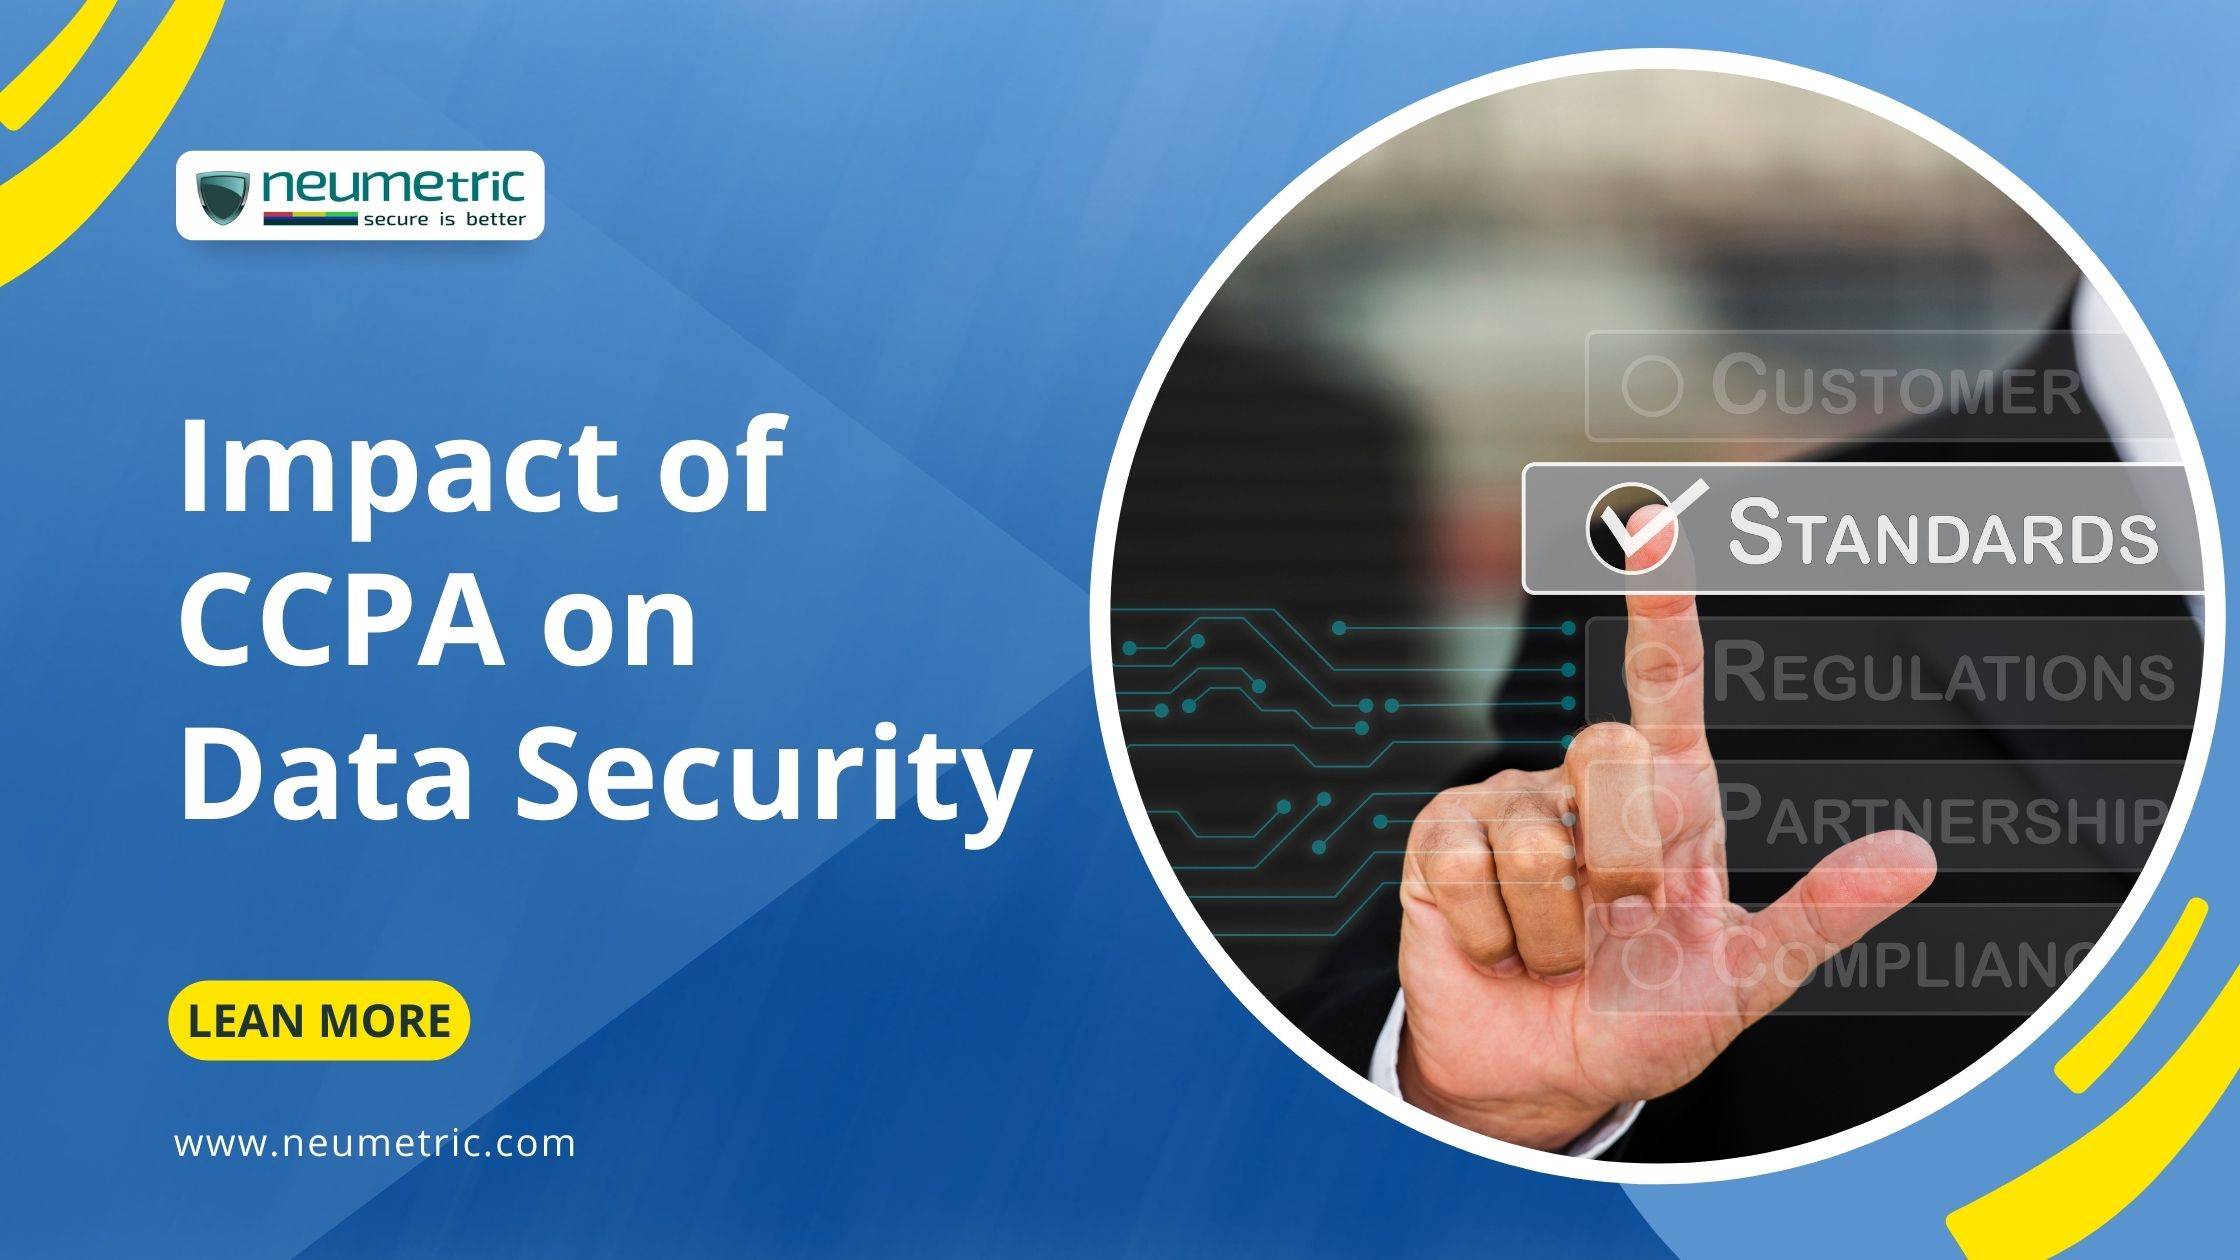 Impact of CCPA on Data Security